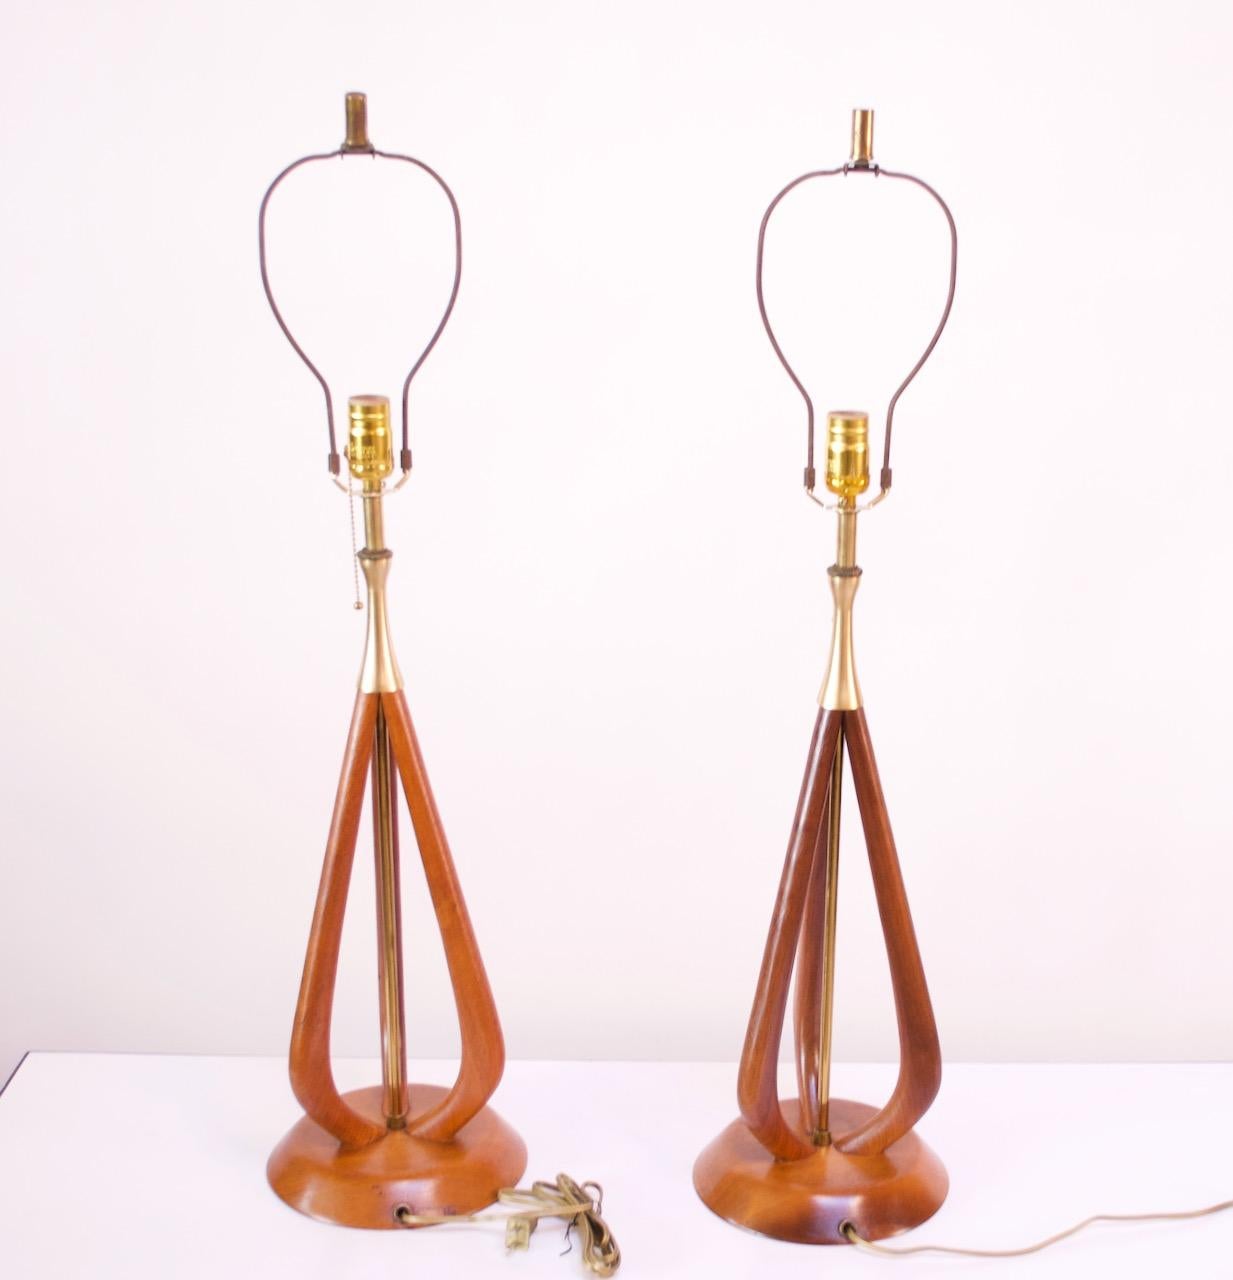 Sculptural pair of 1950s American Modern table lamps composed of a round, solid walnut platform base and carved frame that houses a brass-plated rod at the center. Lamps are finished on the top by gold brushed-aluminum mounts connected to brass